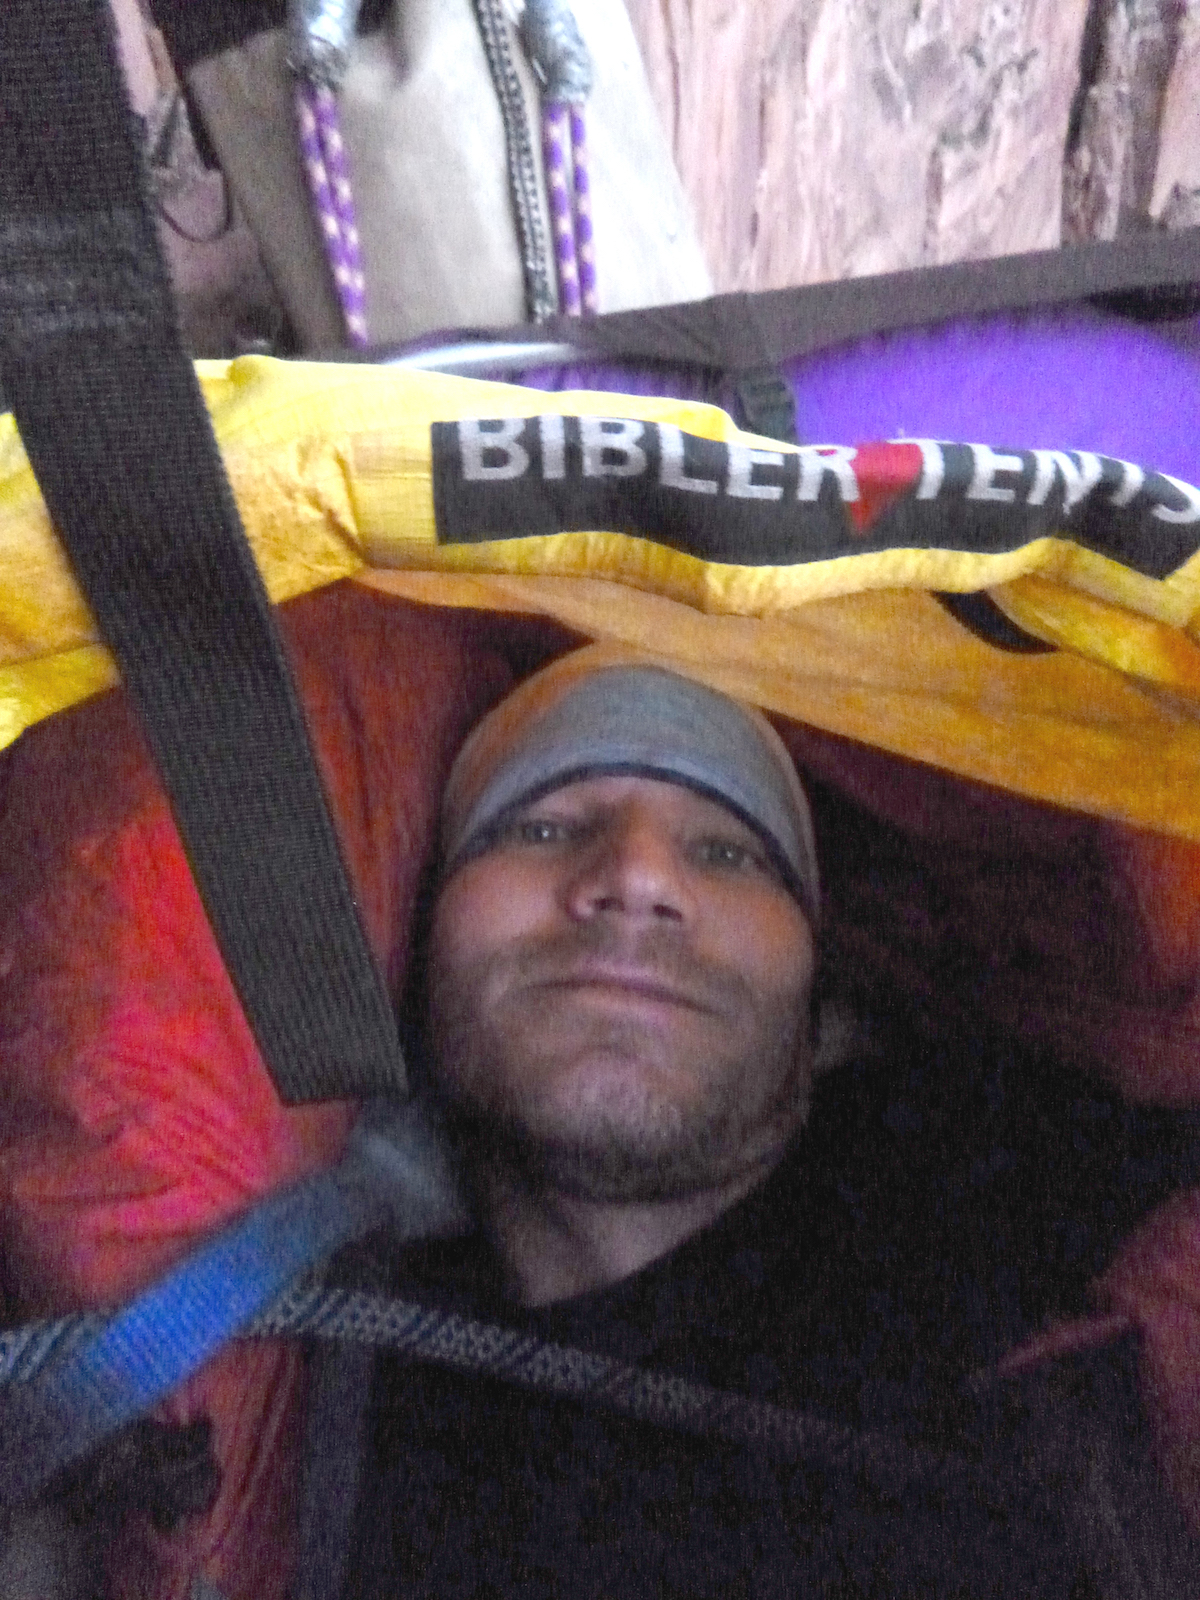 The author enjoys the comfort of the Mountain Equipment Xeros 800-fill, Russian Goose Down sleeping bag inside his bivy sack on the second morning of his solo ascent of Prodigal Sun (V 5.7 C2, 900') in Zion National Park, October 22. [Photo] Derek Franz